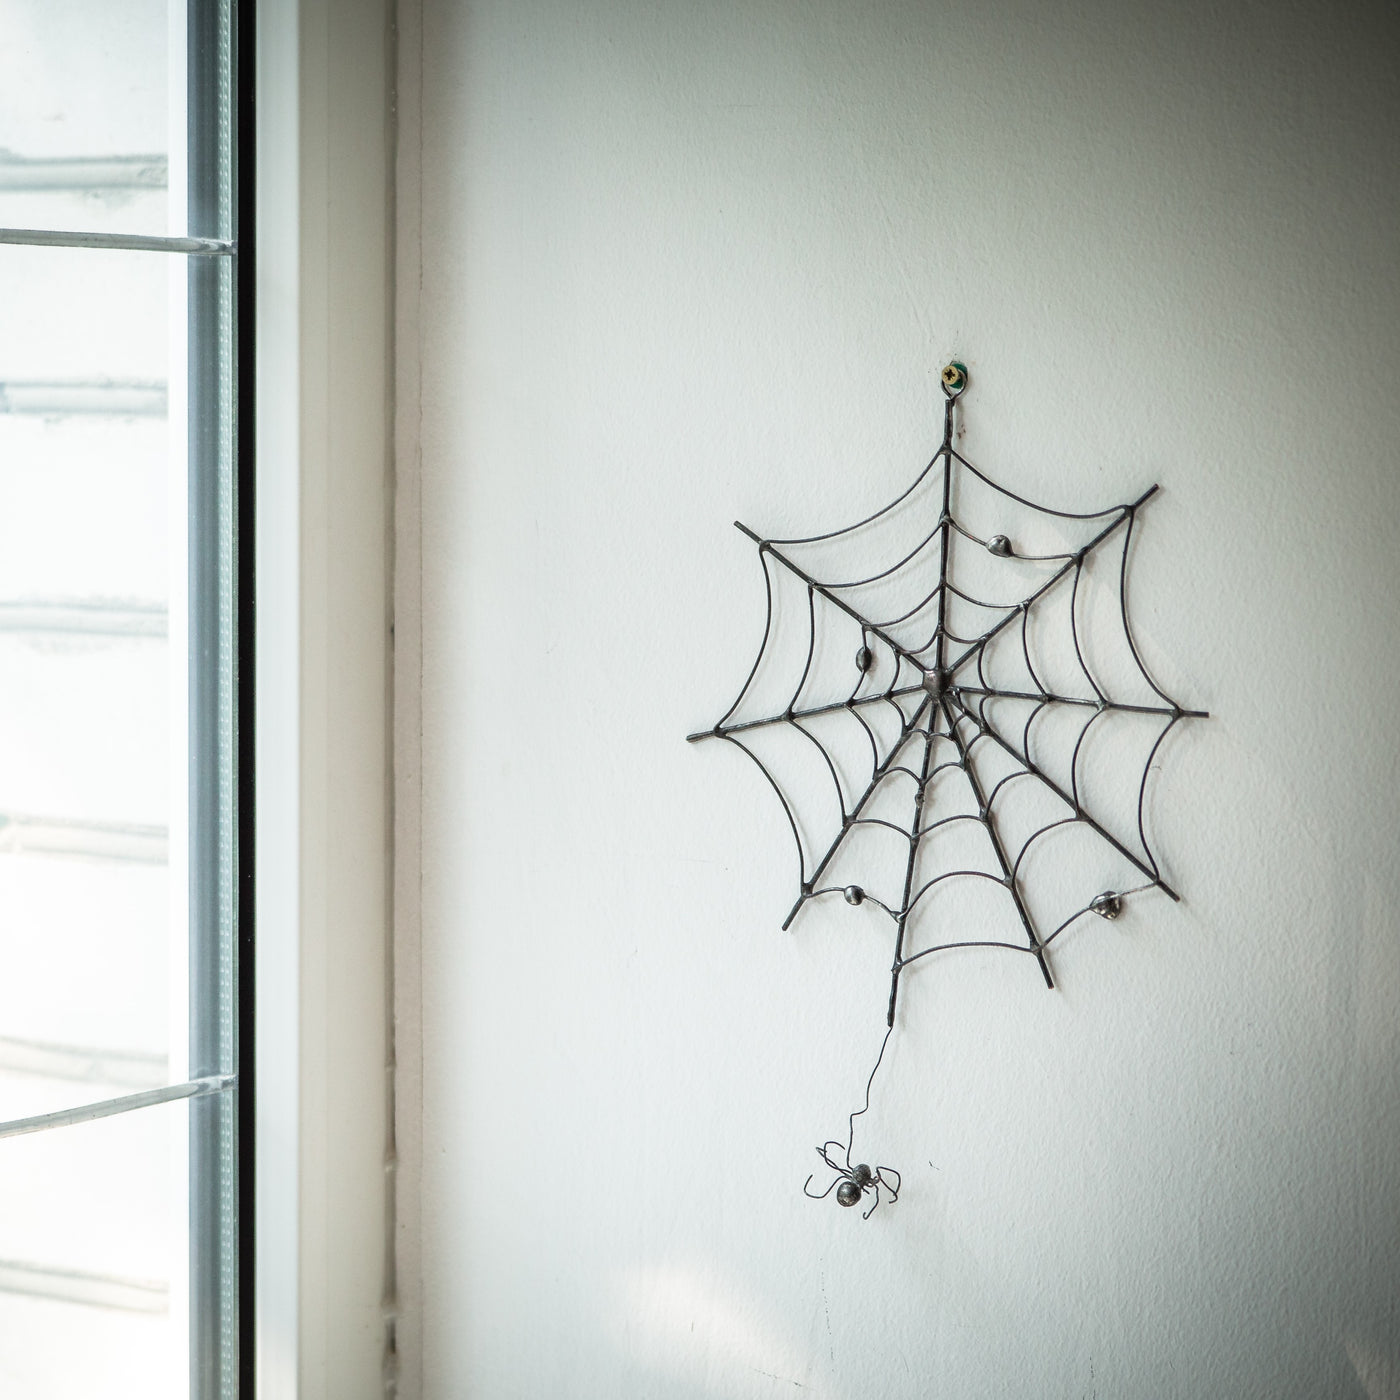 Creepy round spider web for Halloween decorations as a wall hanging